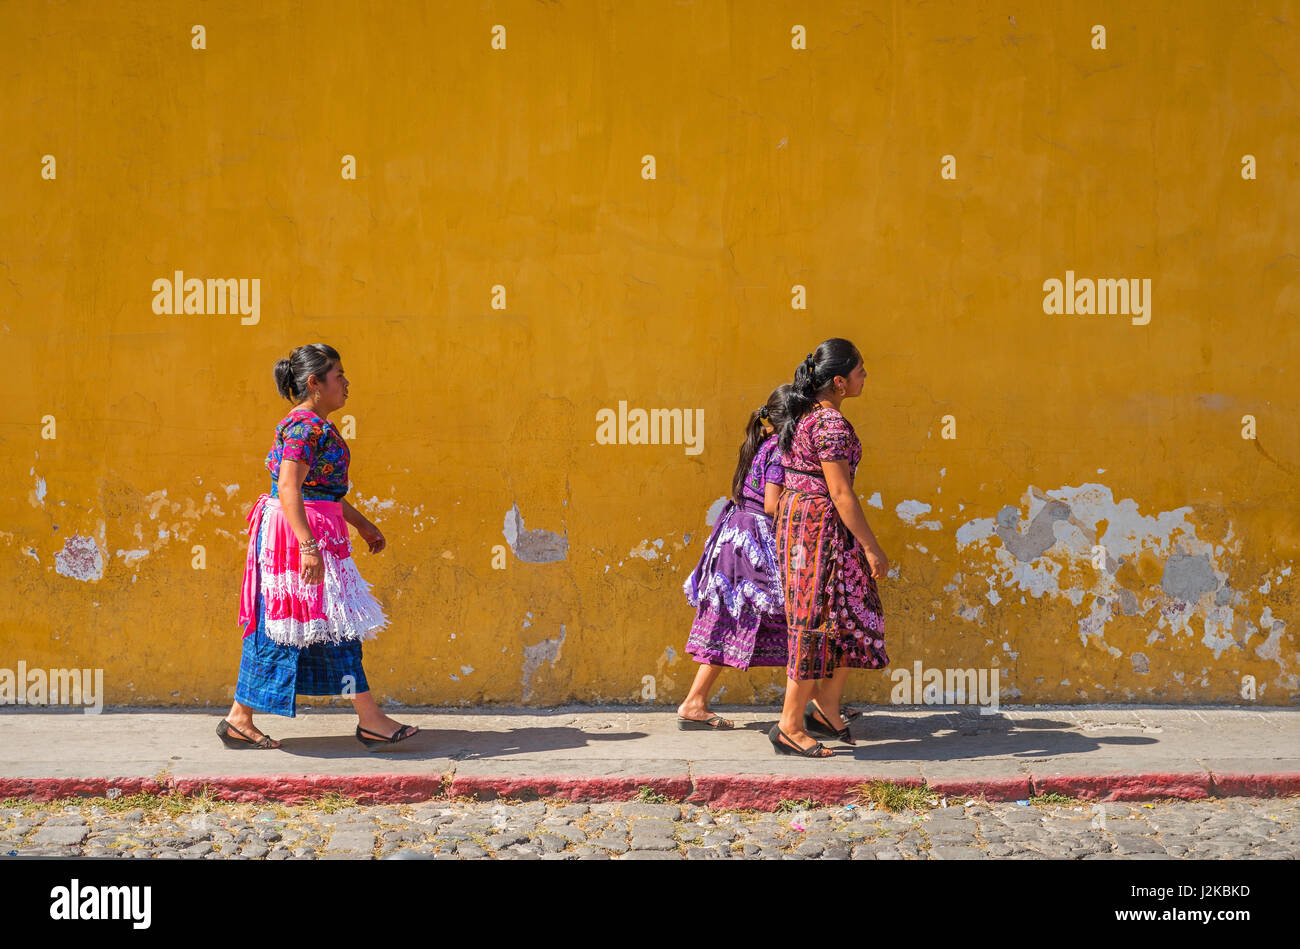 Indigenous Mayan women walking in the street with a colorful yellow wall as background in the city center of Antigua, Guatemala. Stock Photo